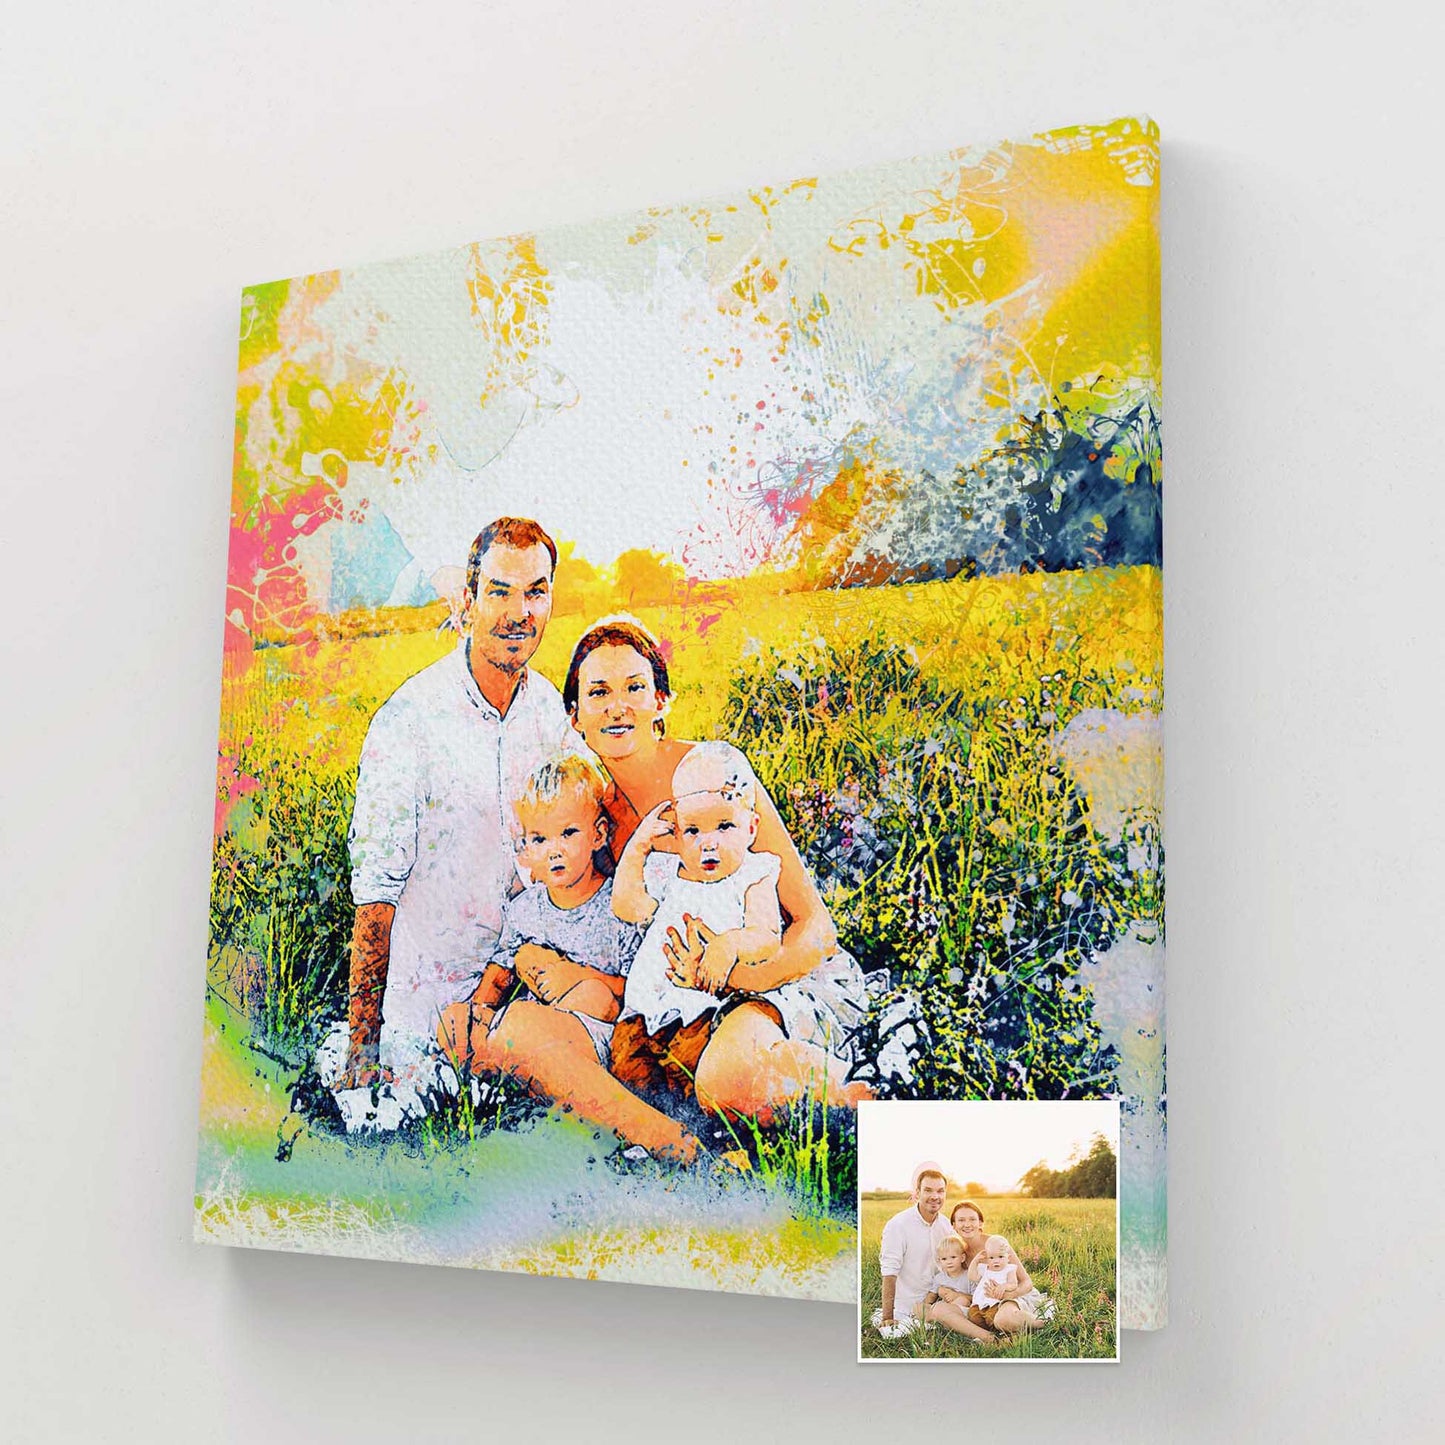 Transform your space into a vibrant oasis of color and joy with a personalized Splash Watercolor Canvas